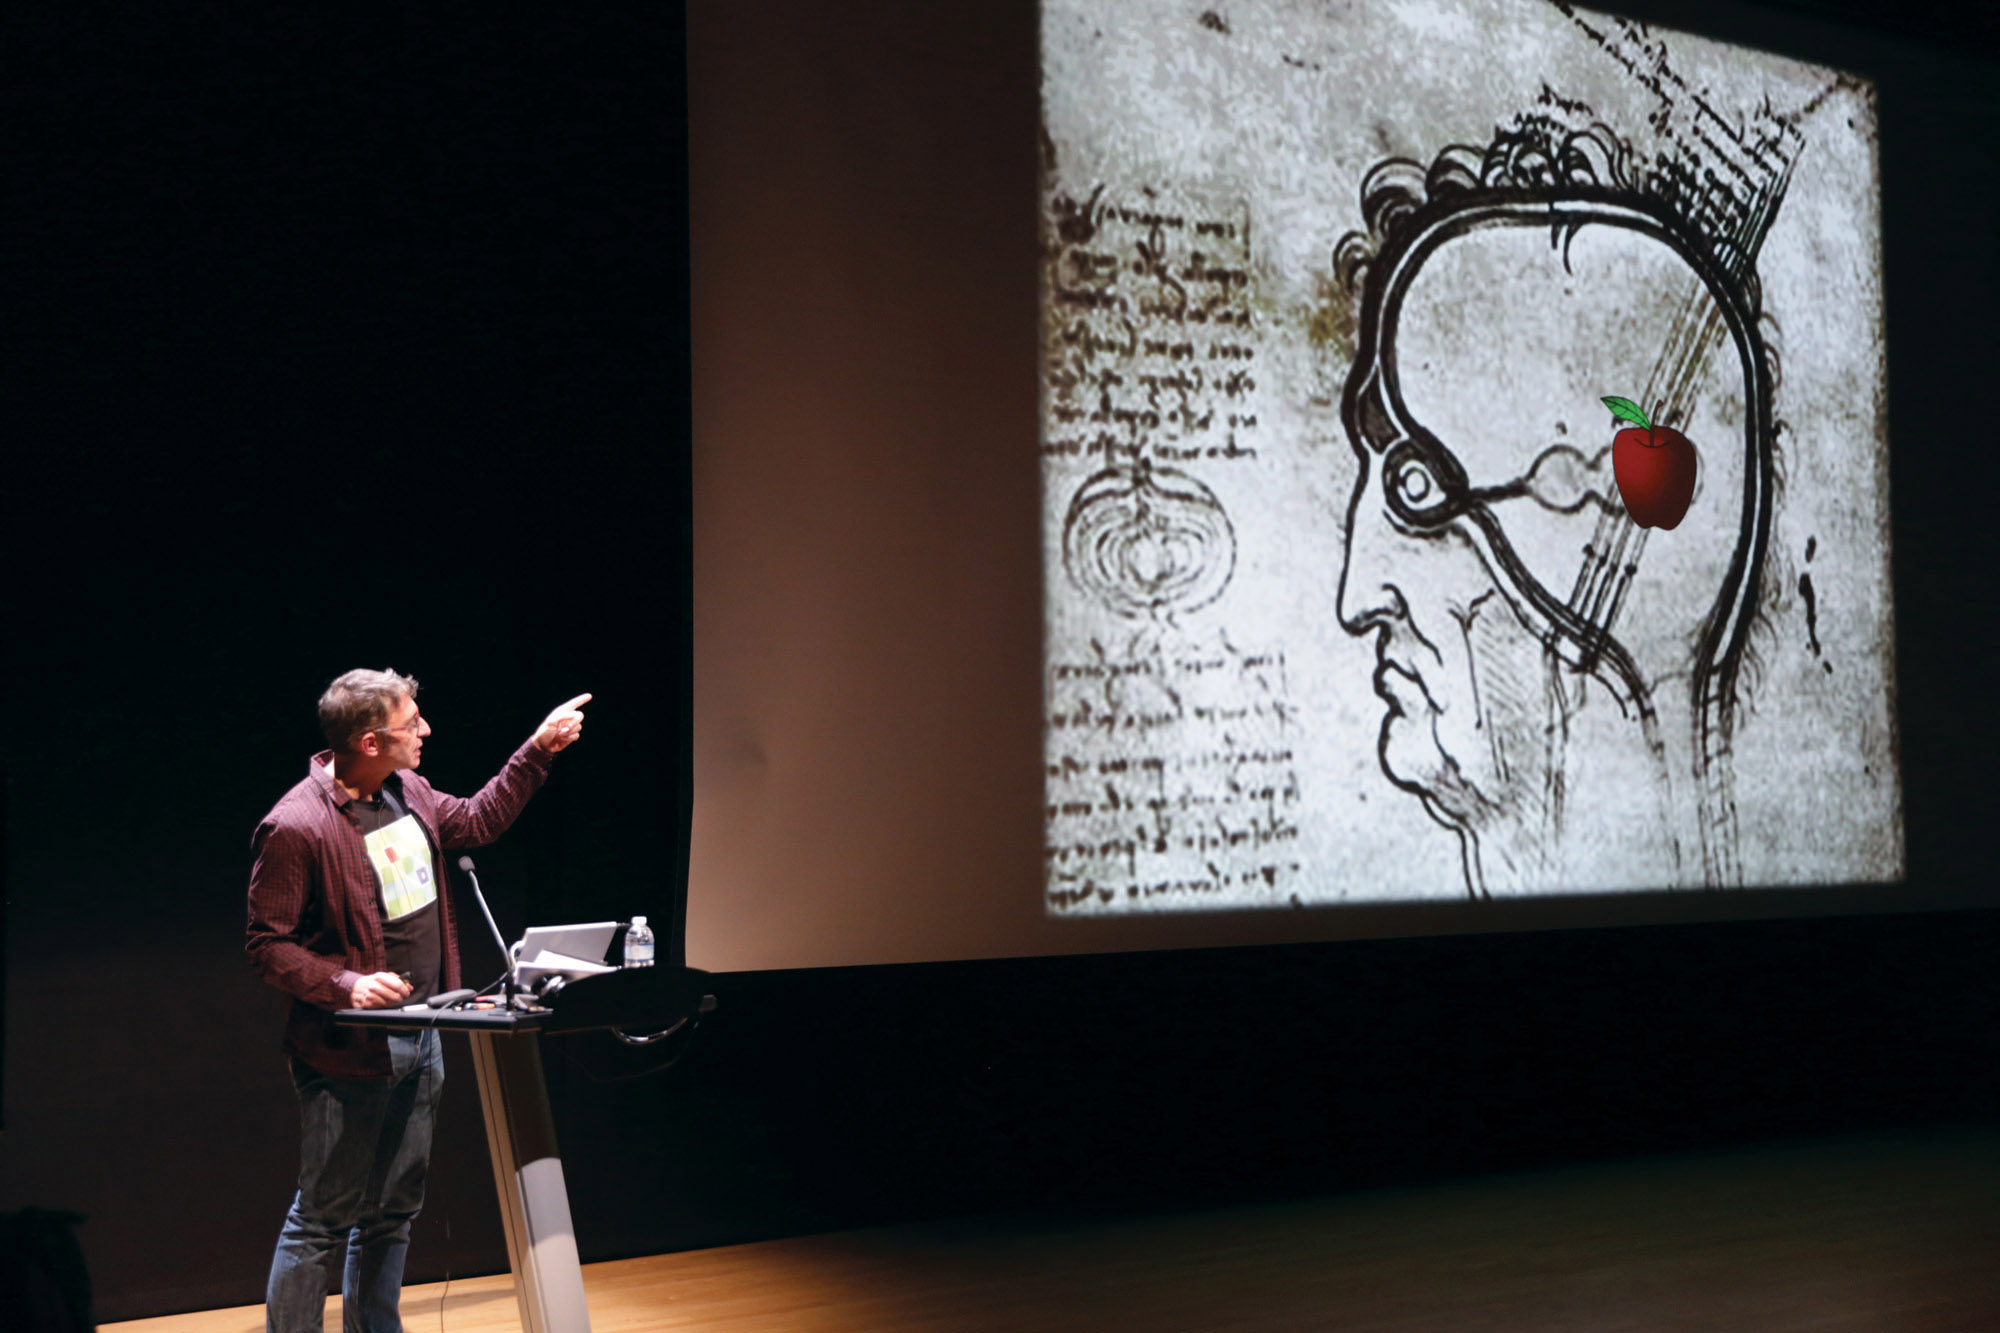 A man on stage pointing at a large screen to his left that is projecting a profile of a man, drawn by Leonardo da Vinci with an emoji apple 